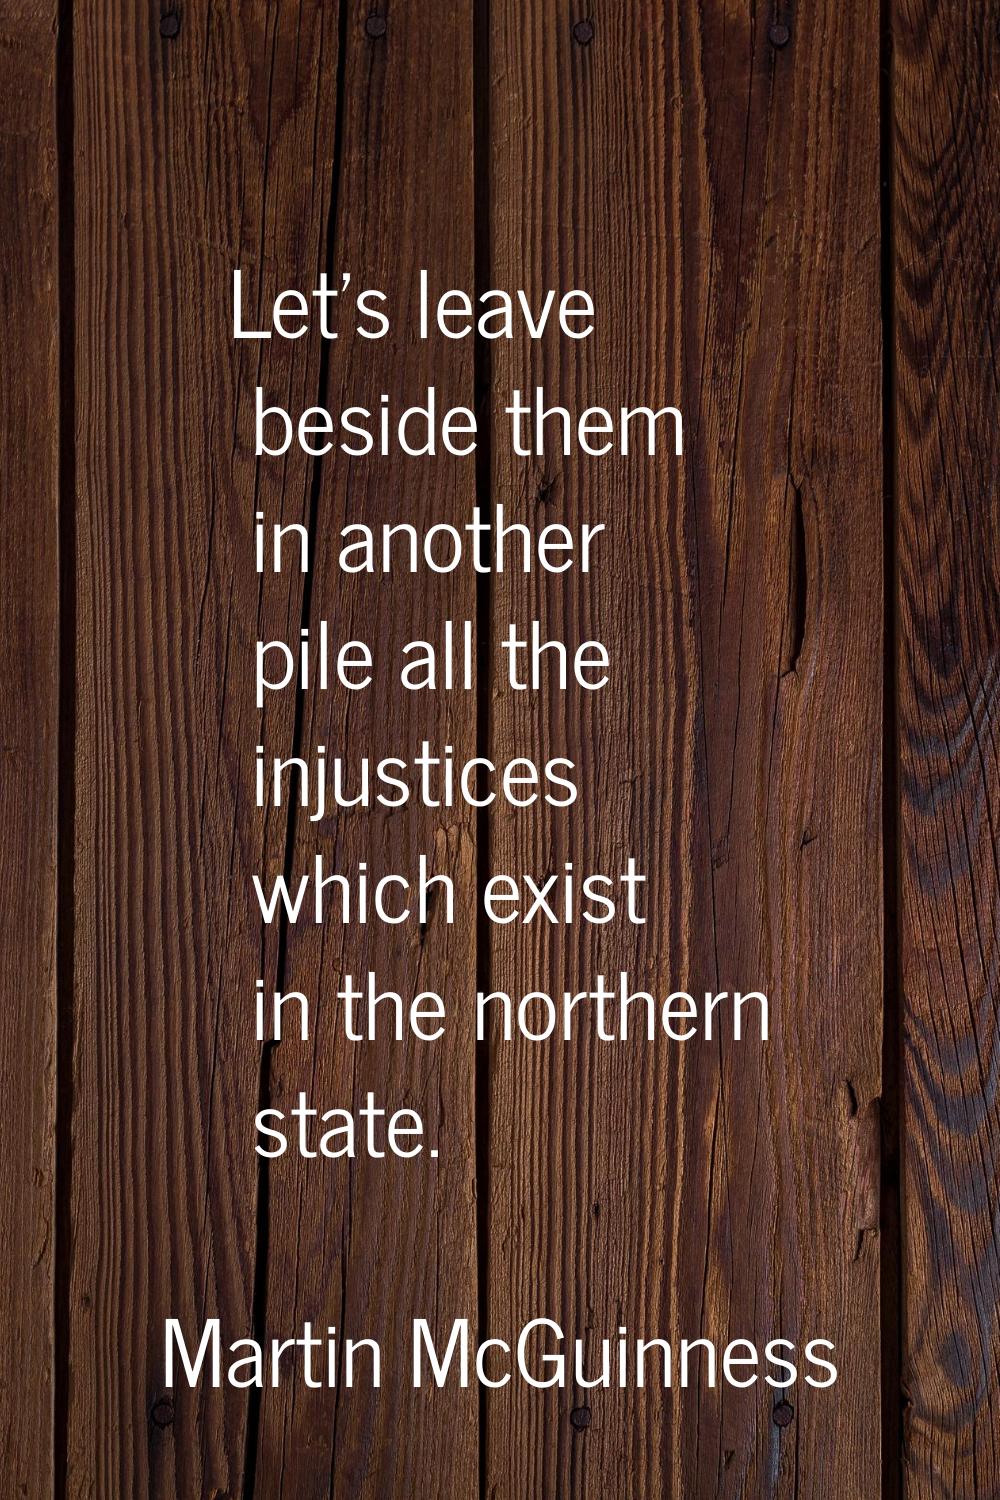 Let's leave beside them in another pile all the injustices which exist in the northern state.